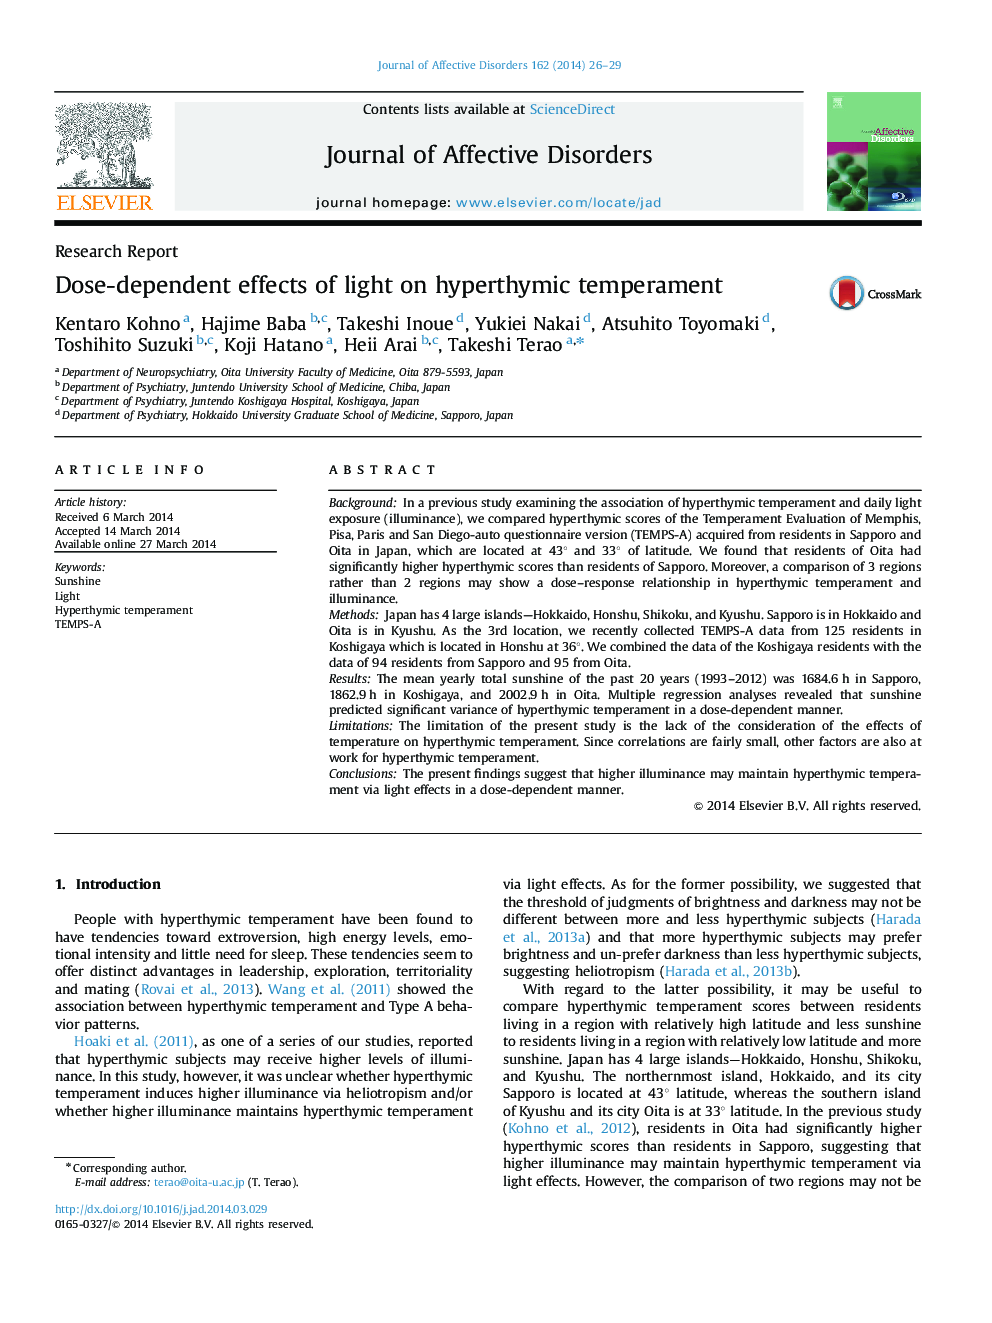 Dose-dependent effects of light on hyperthymic temperament